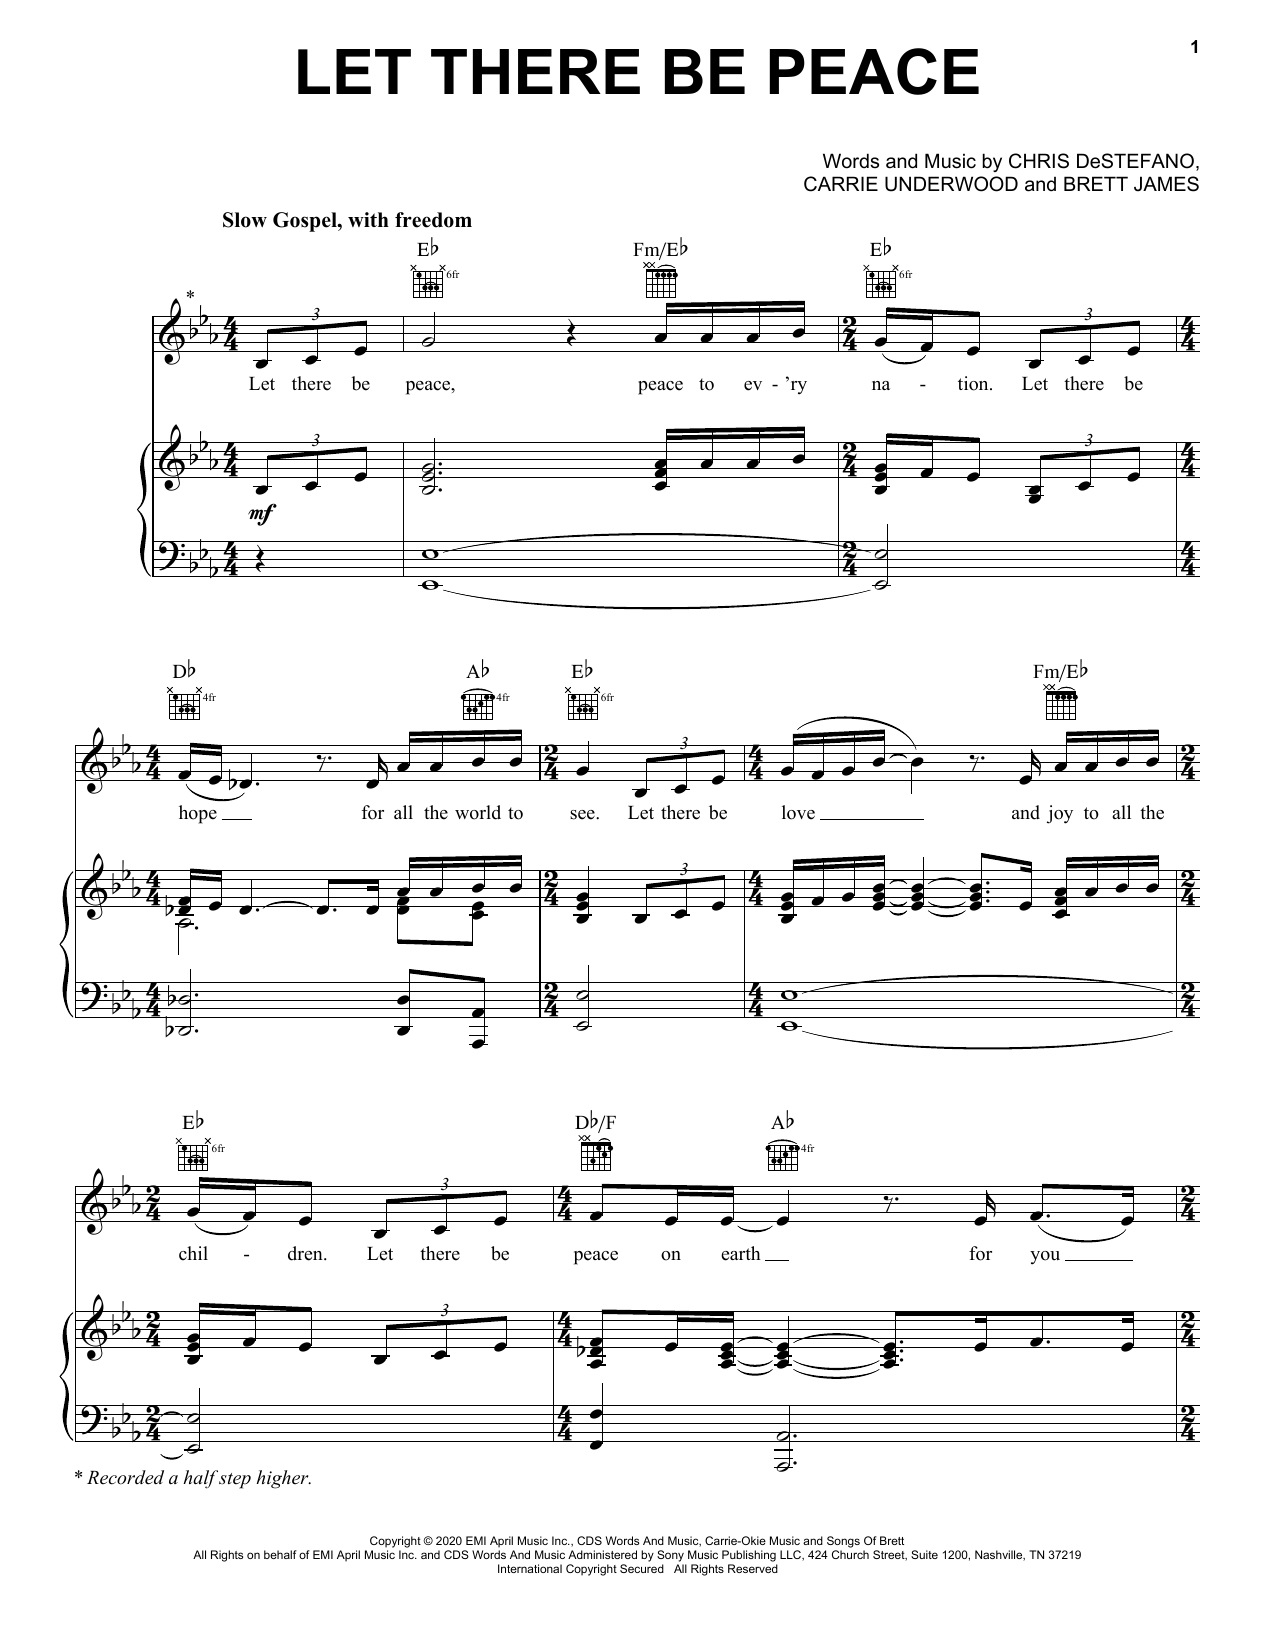 Download Carrie Underwood Let There Be Peace Sheet Music